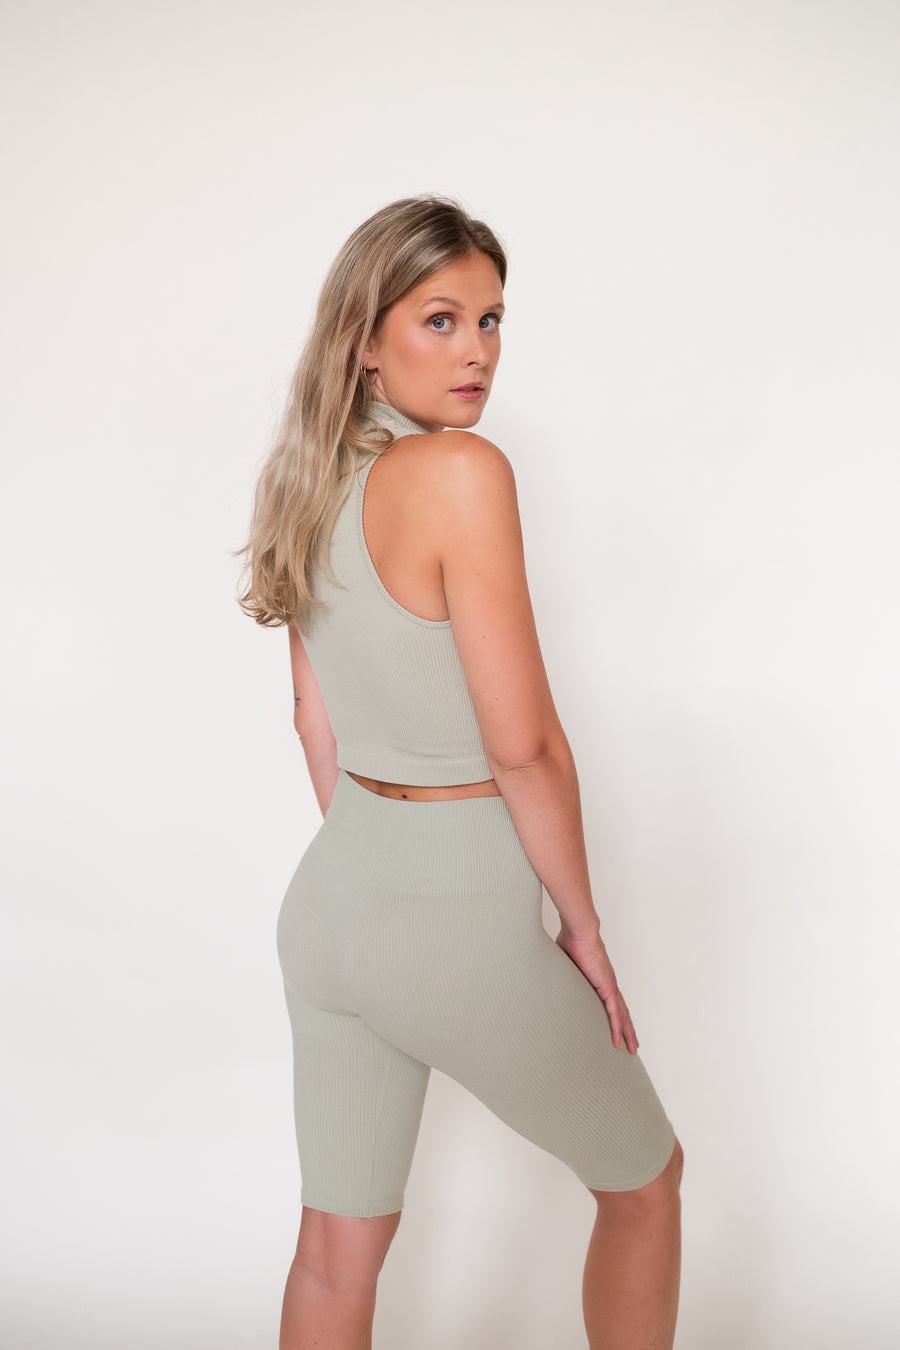 Our sage biker short is seamless, ribbed and sustainable. It's the perfect bottom to wear on a daily basis at home, to the gym or even outside with and oversized shirt or a crop top.